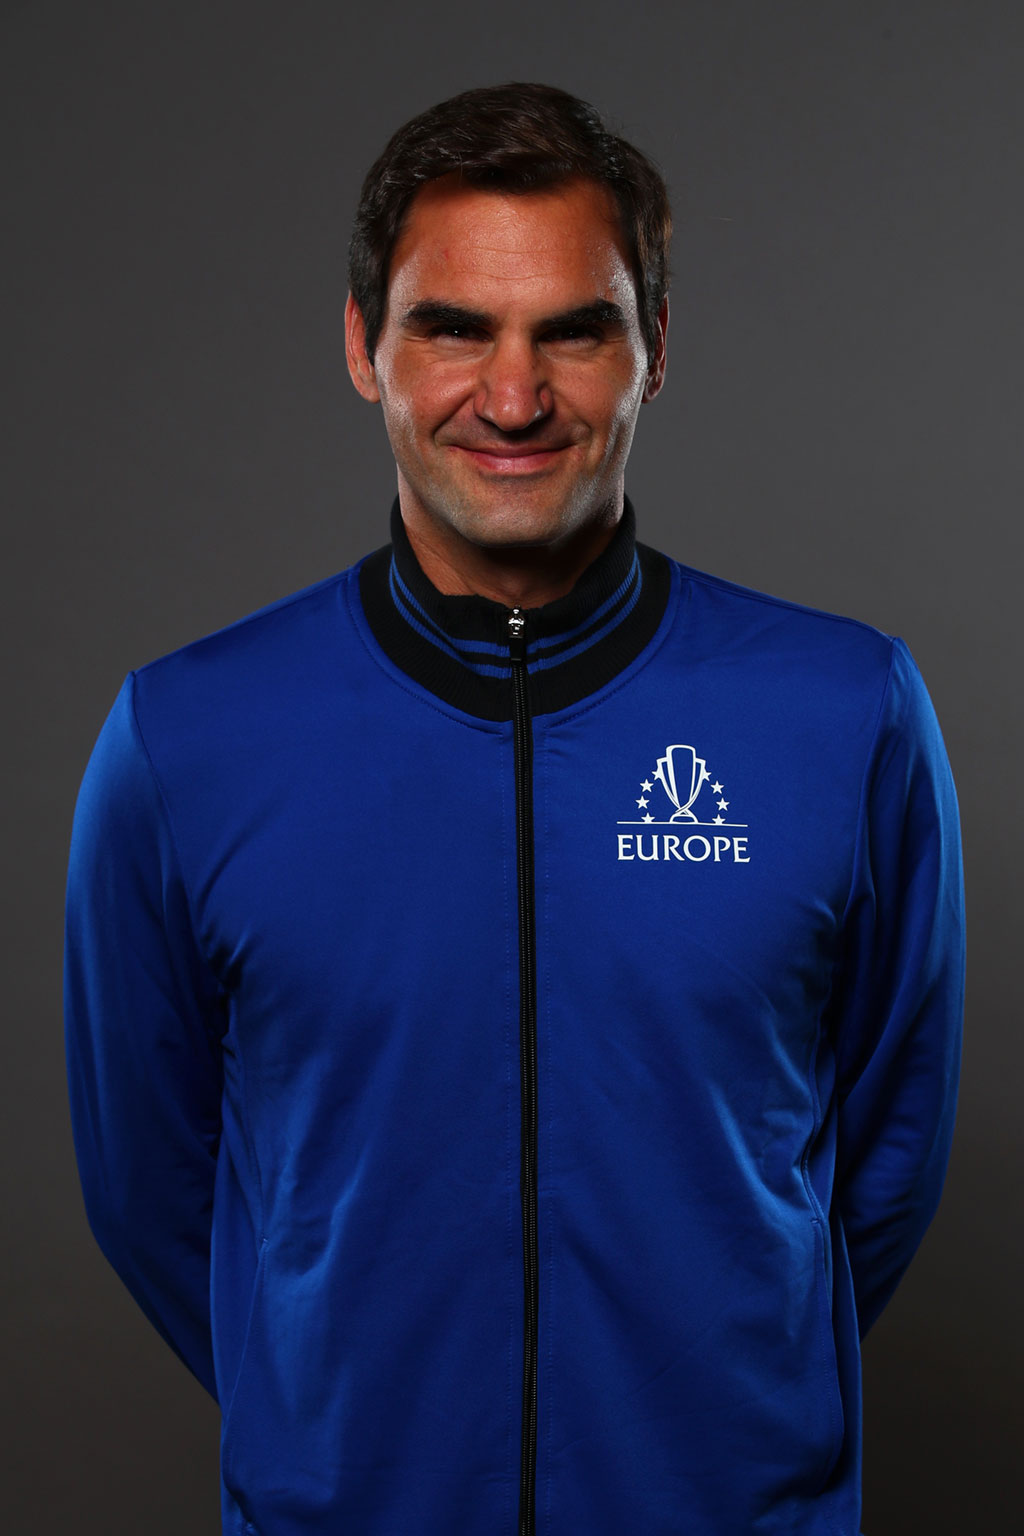 Roger Federer Players Laver Cup